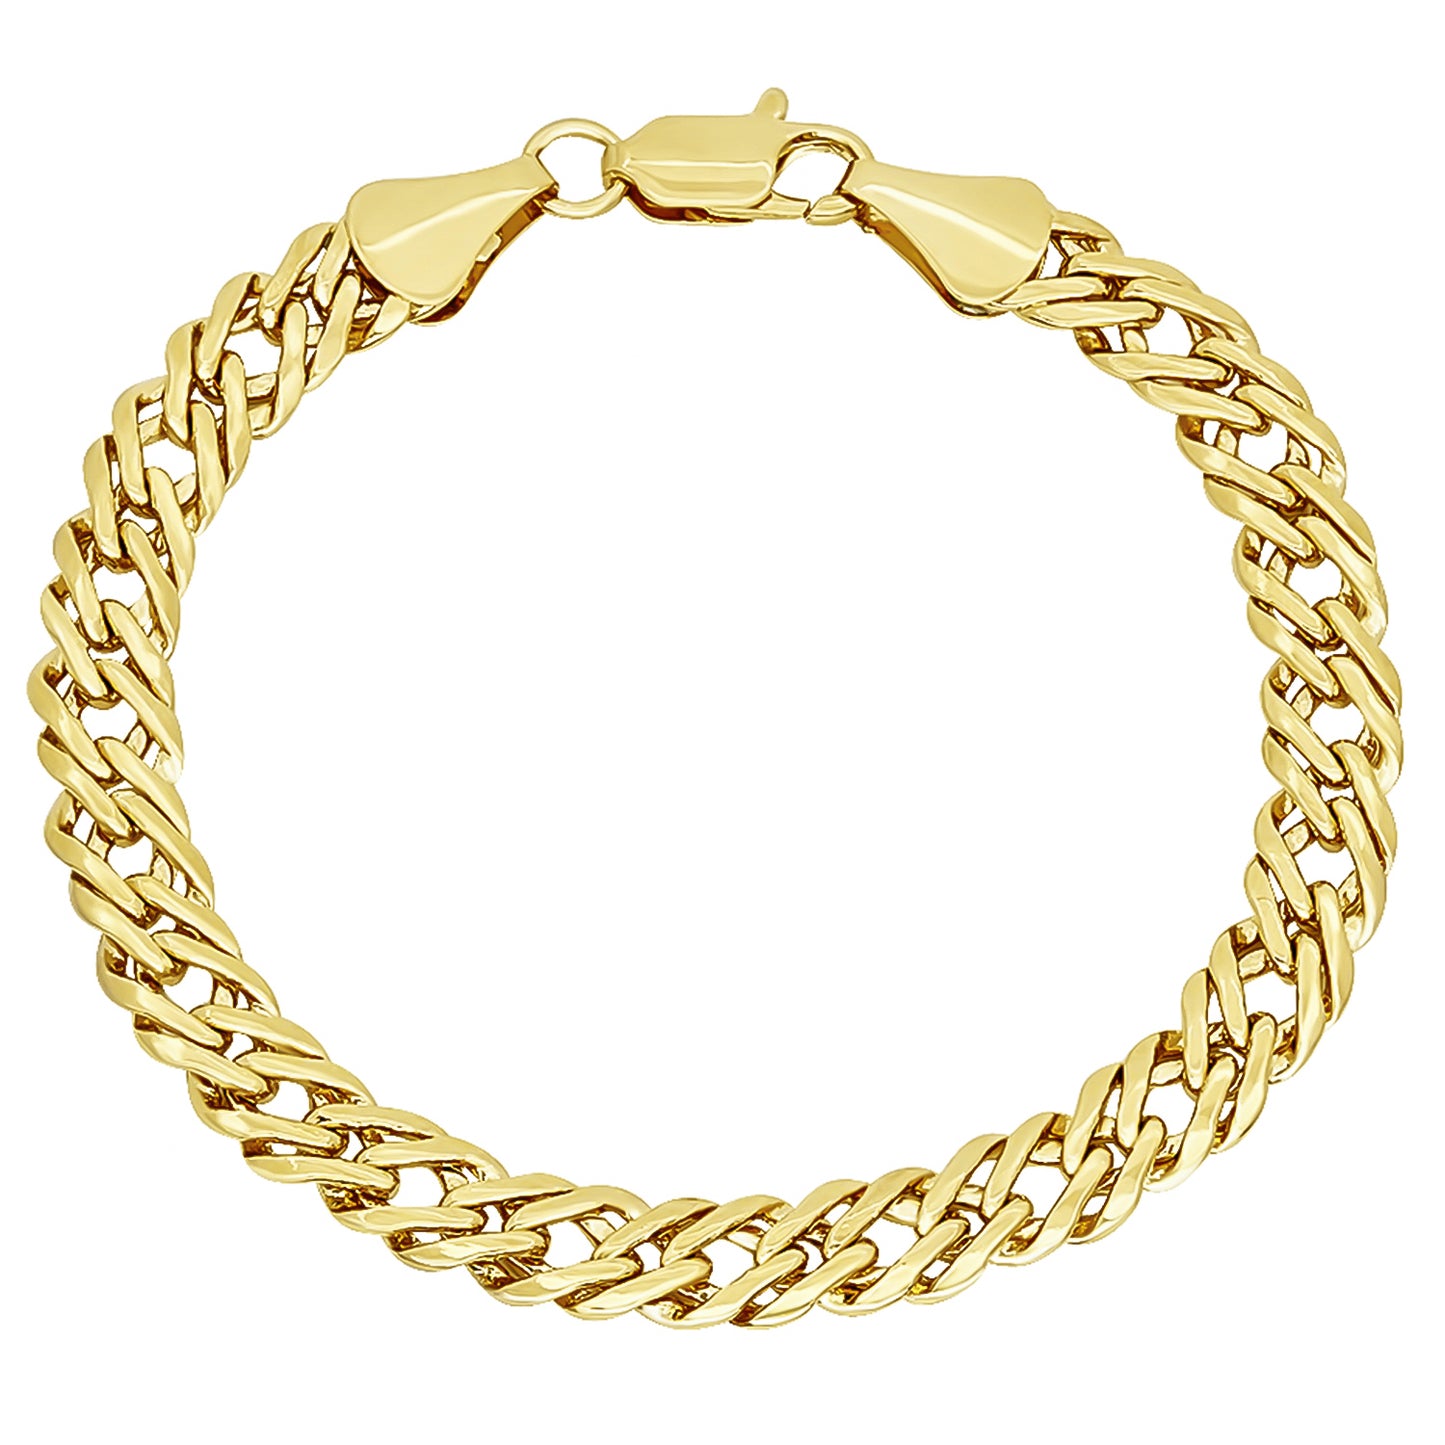 7.4mm 14k Yellow Gold Plated Cable Venetian Chain Necklace + Gift Box (SKU: GL-061B-BX)